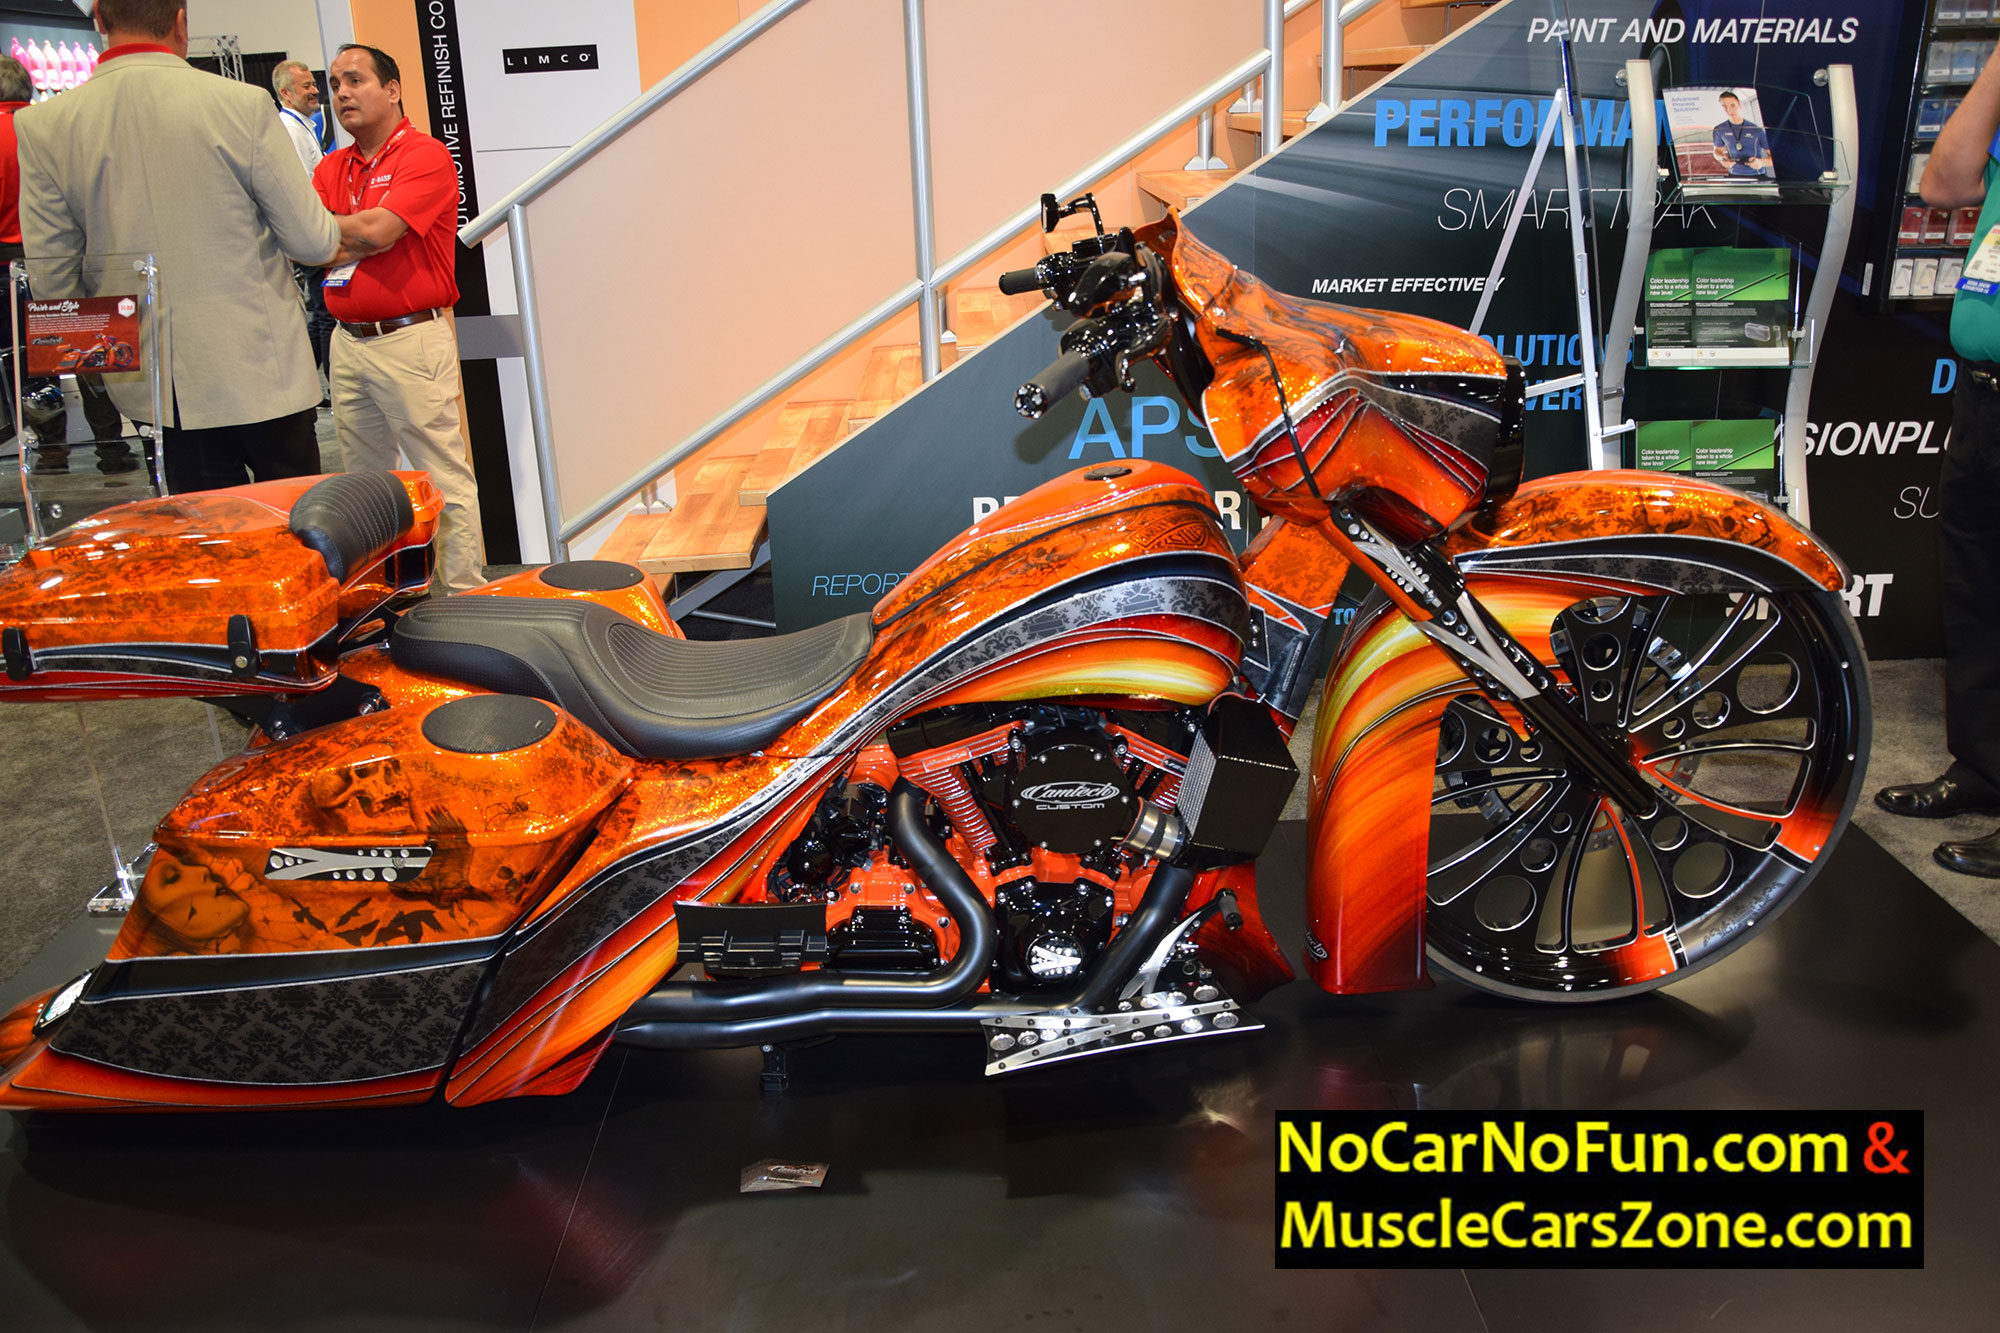 Musclecarszone.com Presents You The Very Best Rides Of The SEMA Show